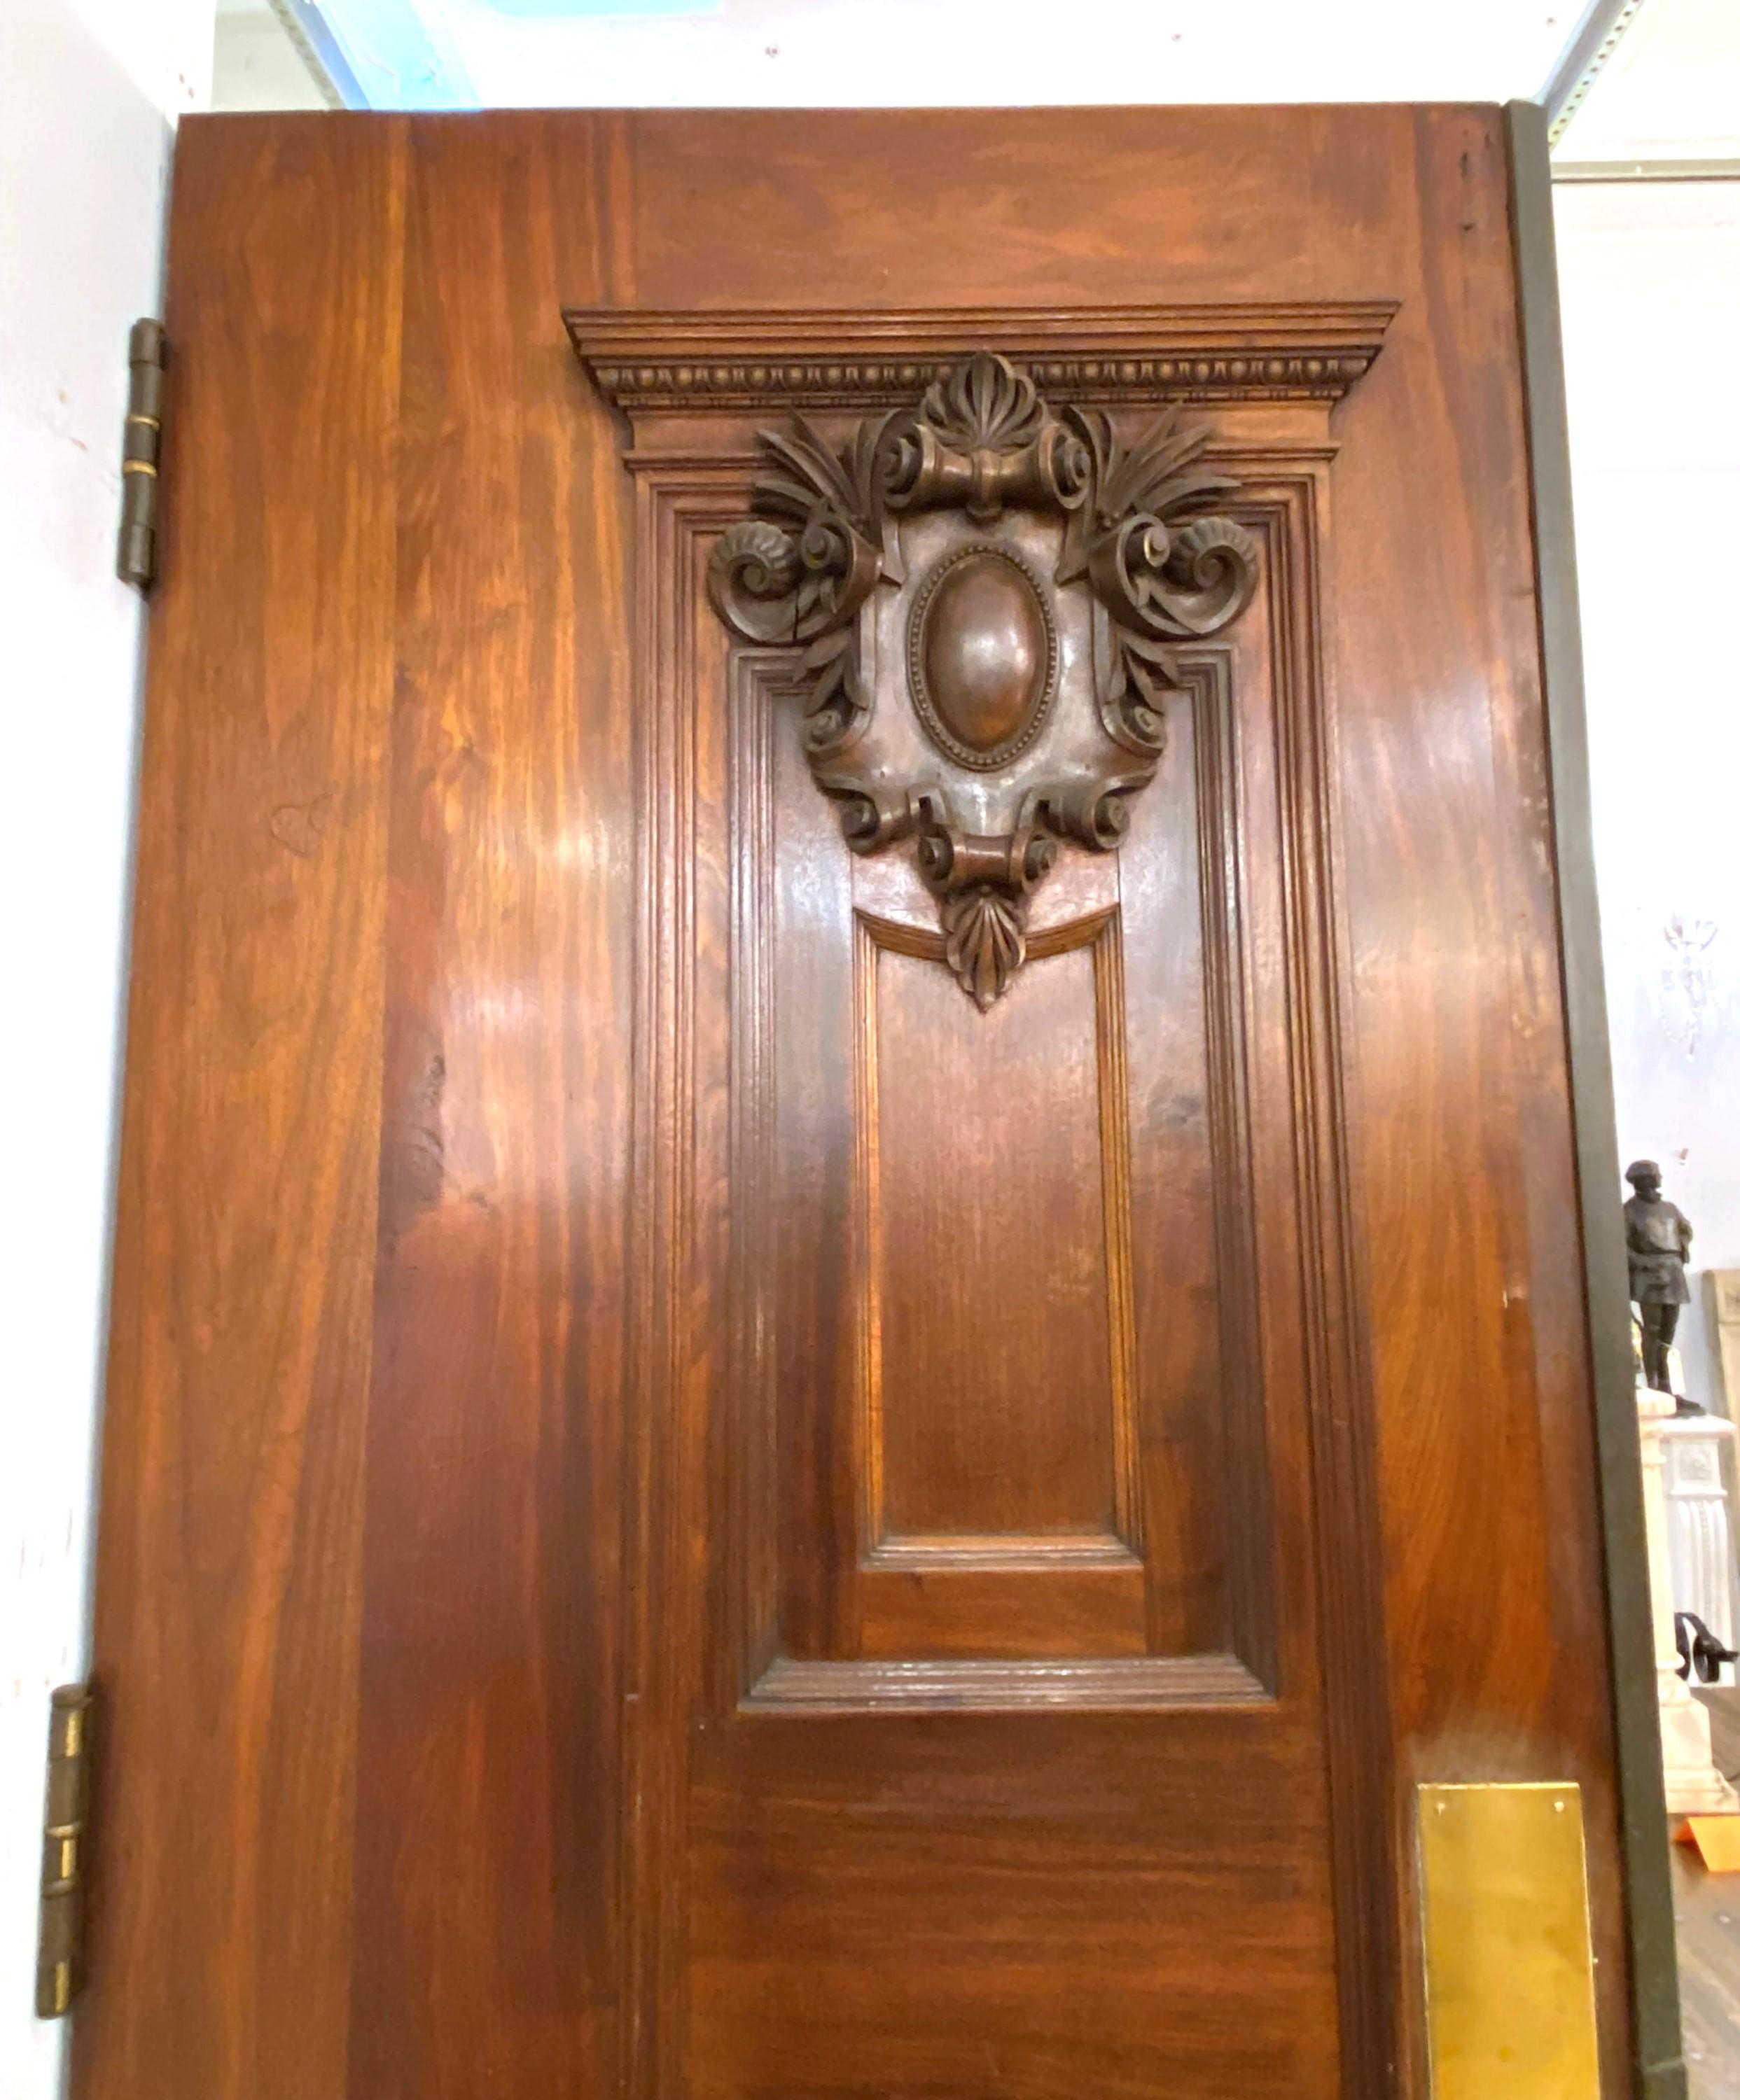 Early 20th century pair of extra thick solid walnut doors. Each door features a hand carved cartouche in front. One lower panel was replaced with glass. Priced as a pair. Please note, this item is located in one of our NYC locations.